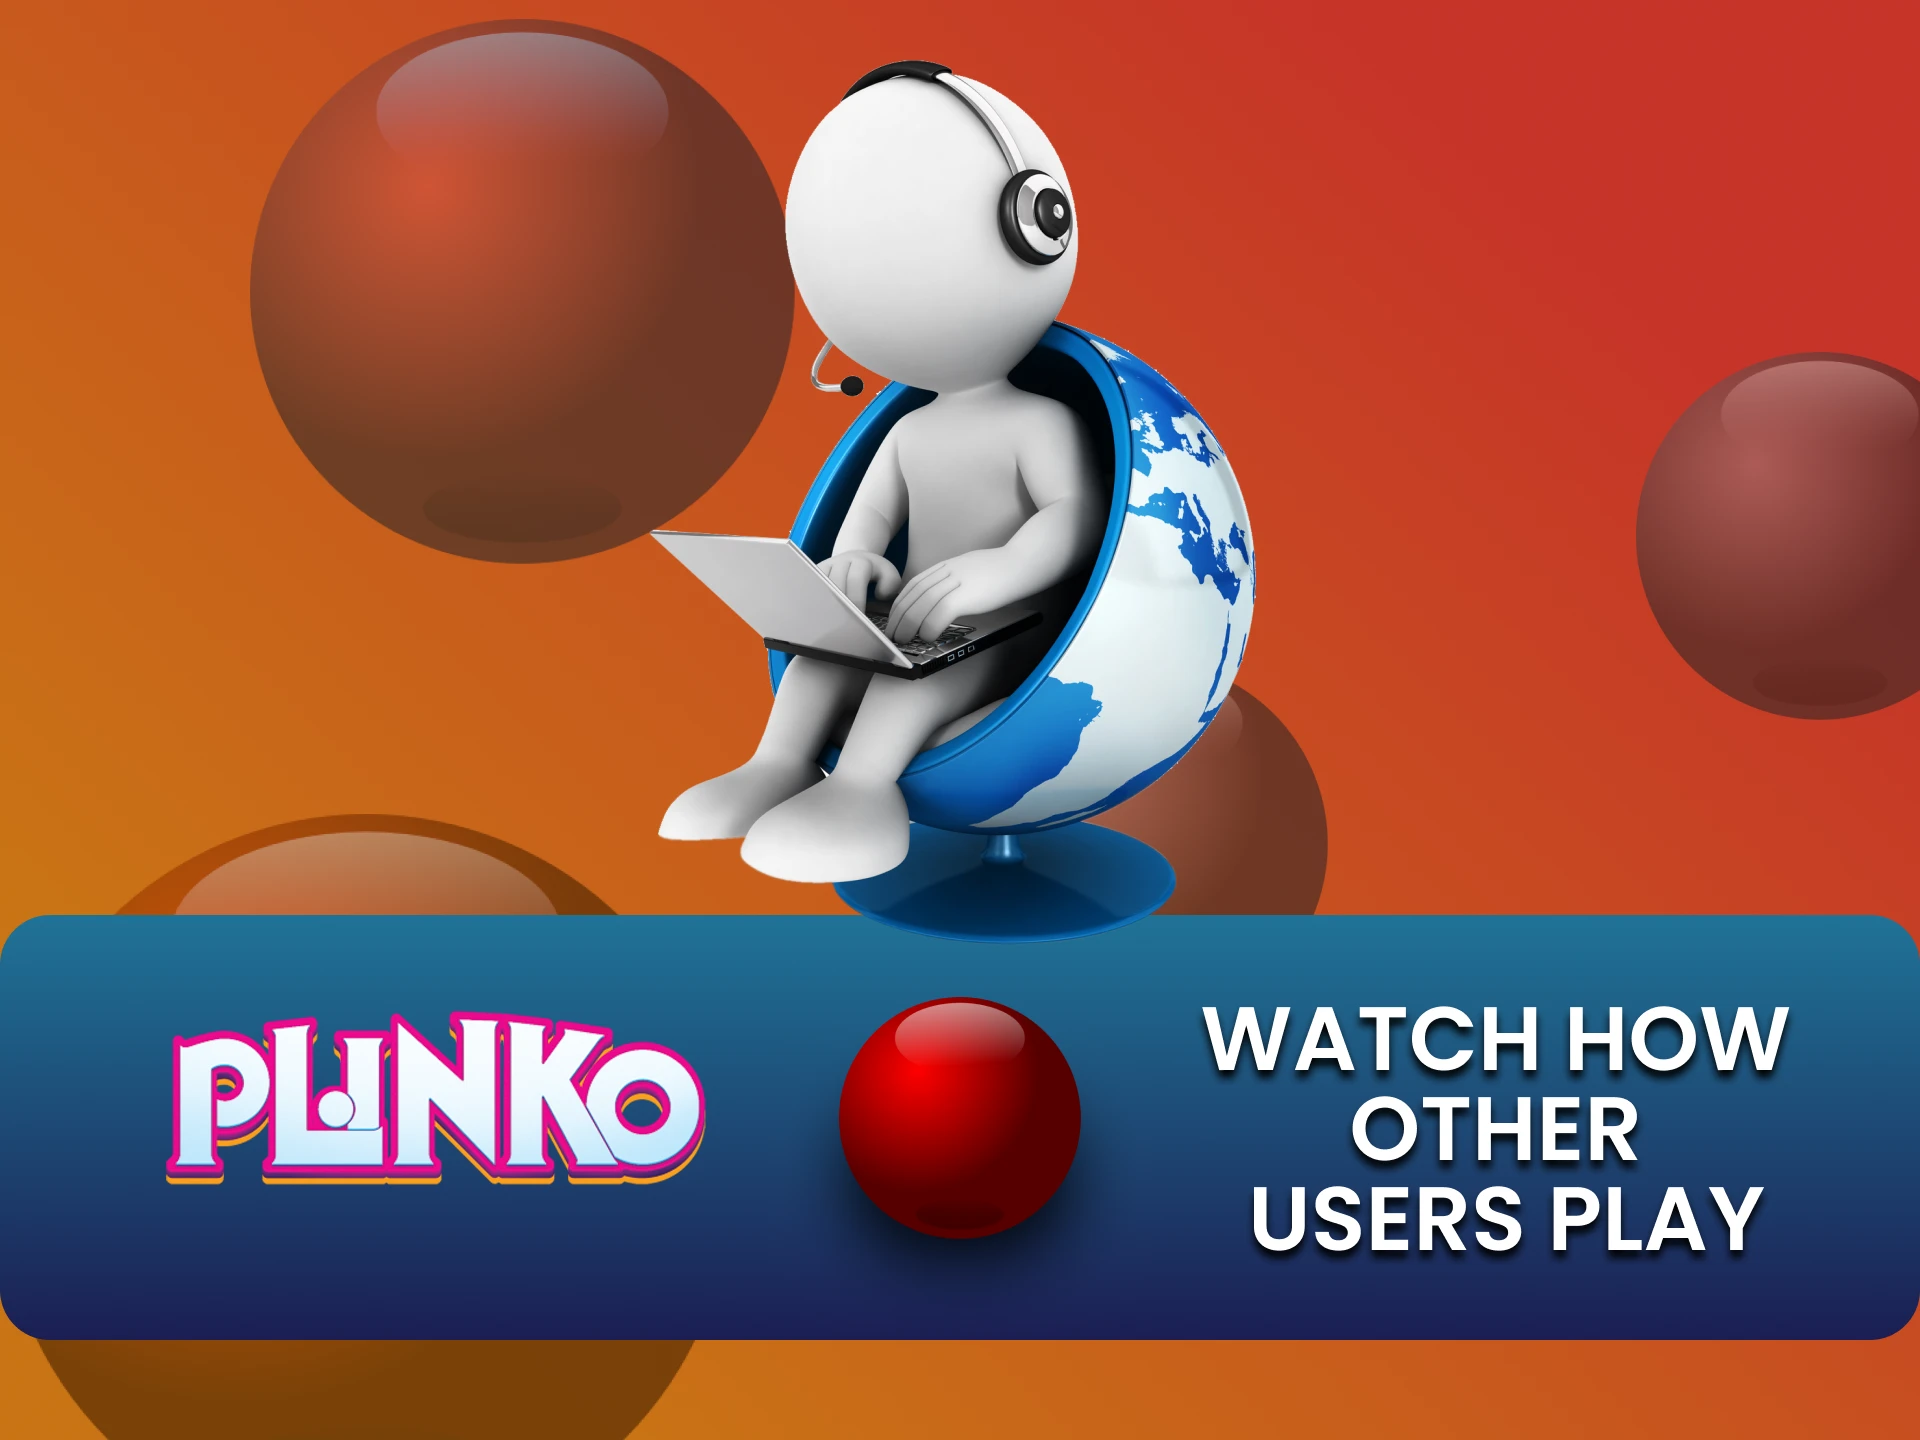 Watch and study other Plinko game users.